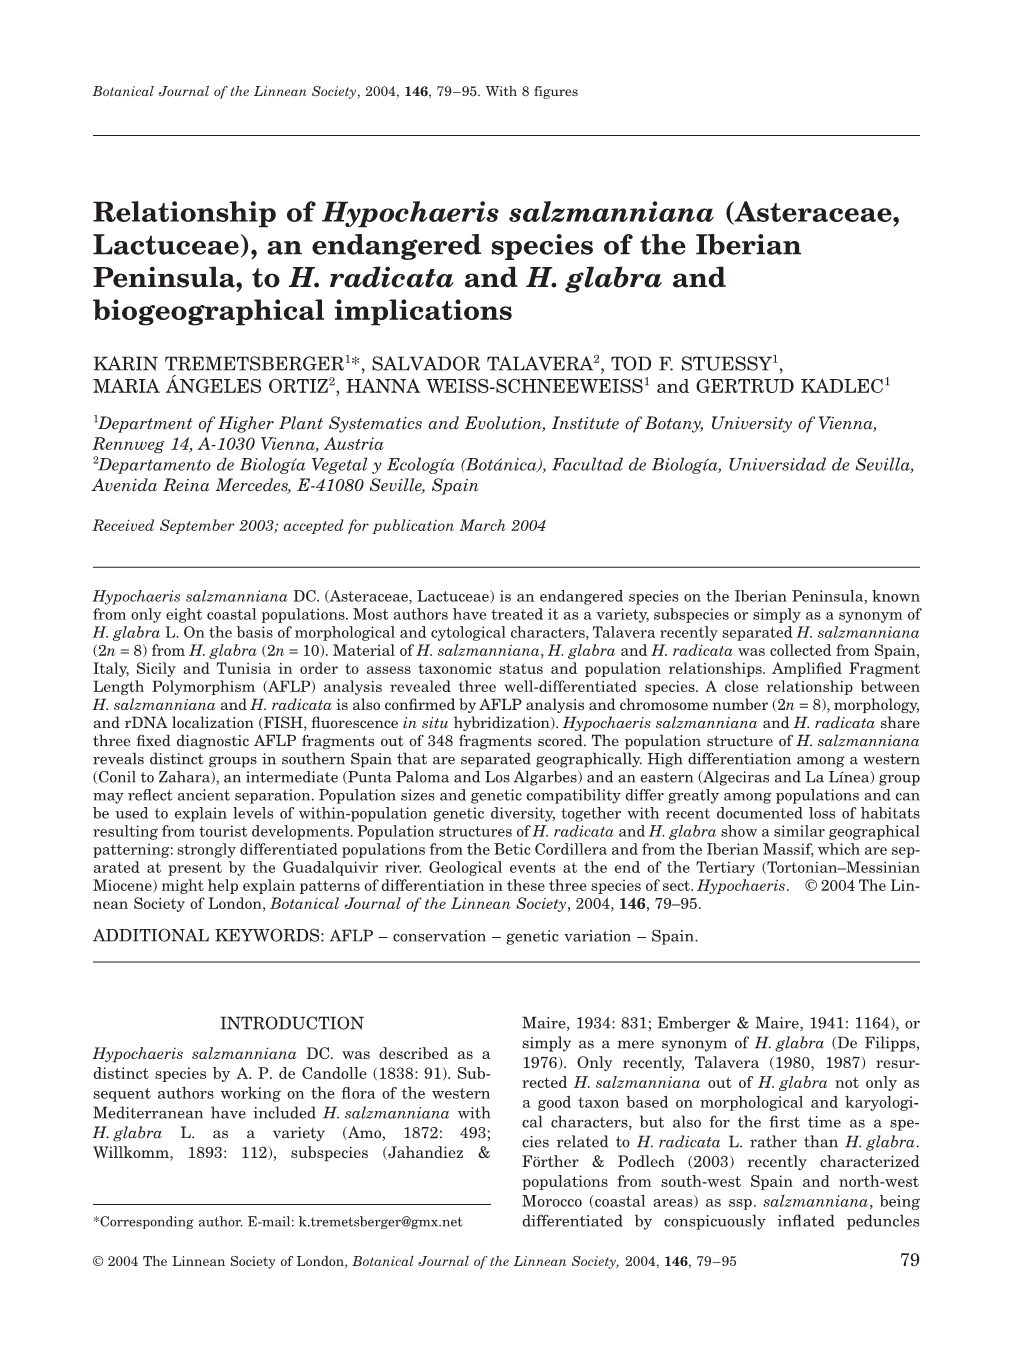 Relationship of Hypochaeris Salzmanniana (Asteraceae, Lactuceae), an Endangered Species of the Iberian Peninsula, to H